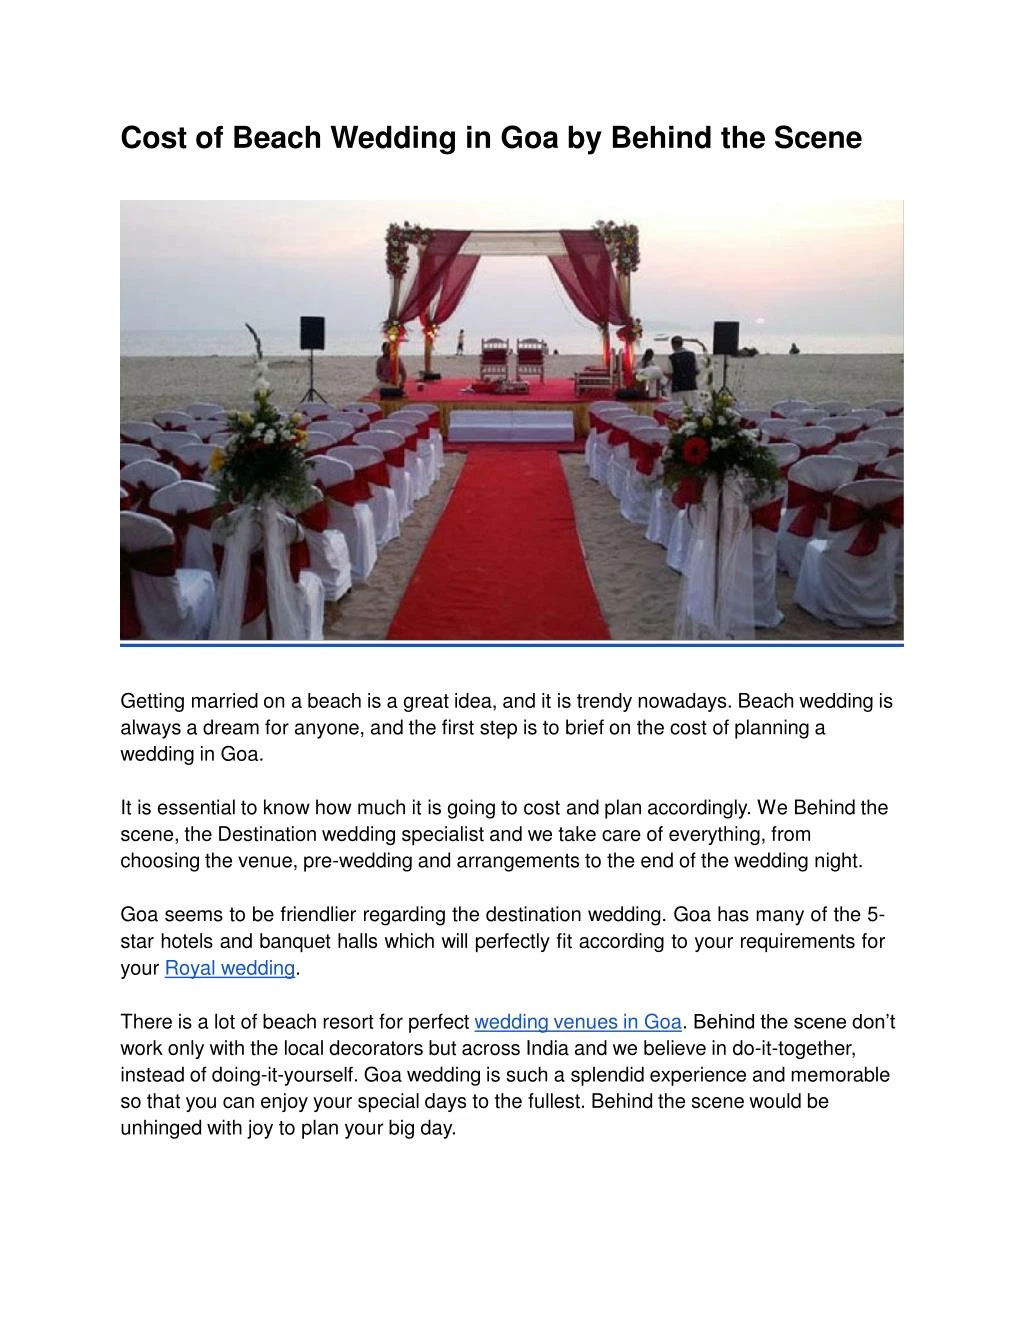 Ppt Cost Of Beach Wedding In Goa By Behind The Scene Powerpoint